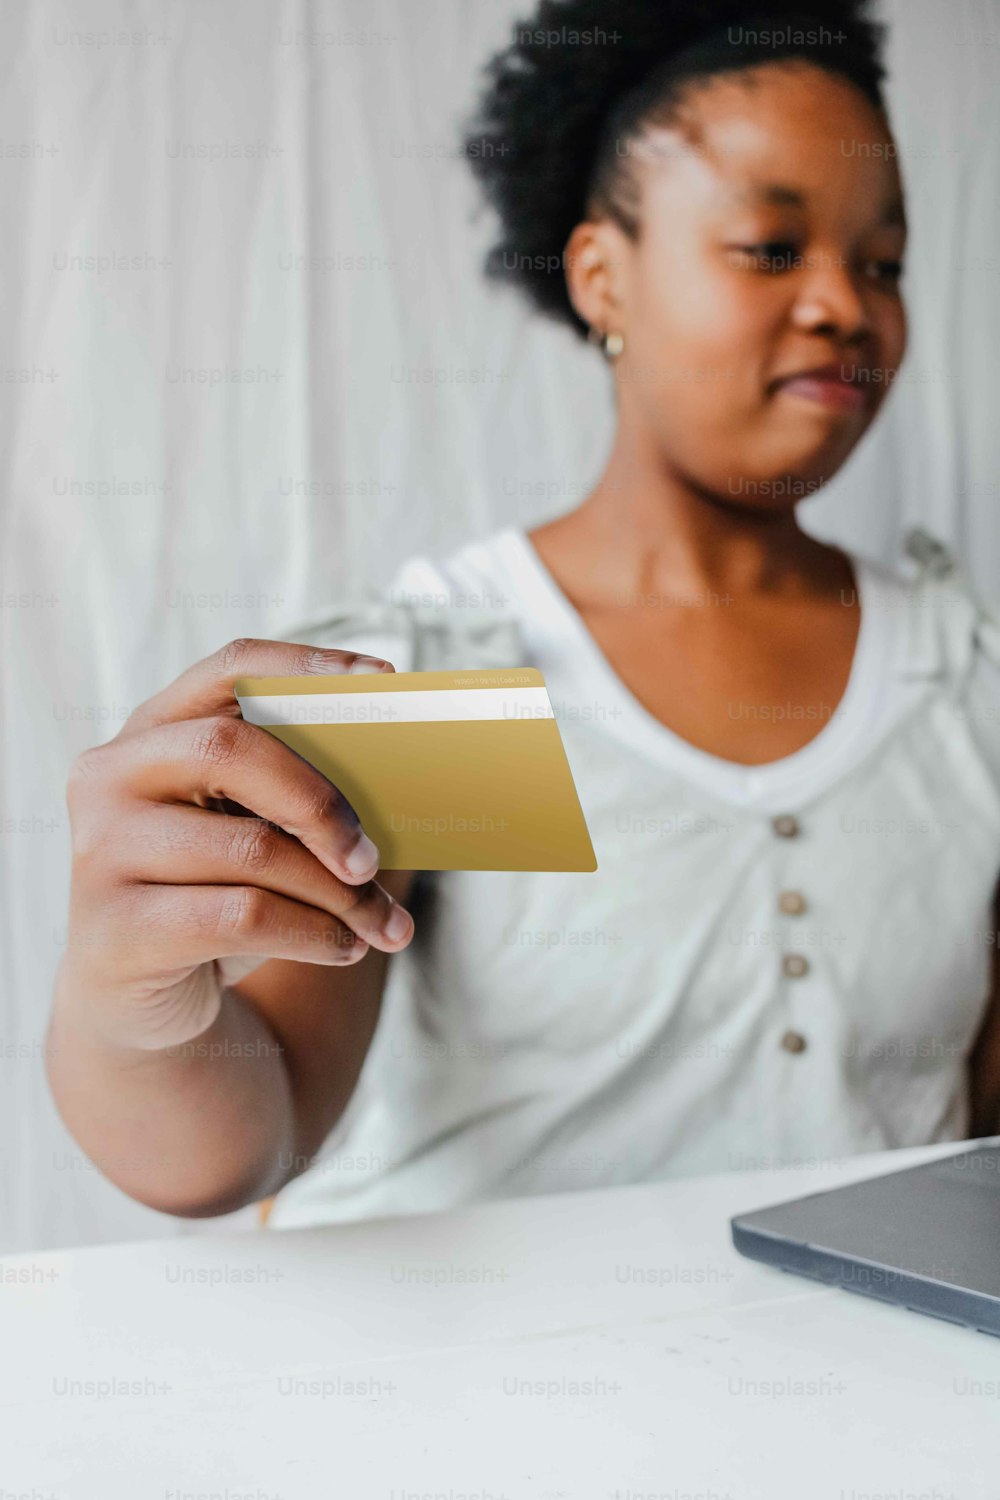 a woman sitting at a table holding a credit card